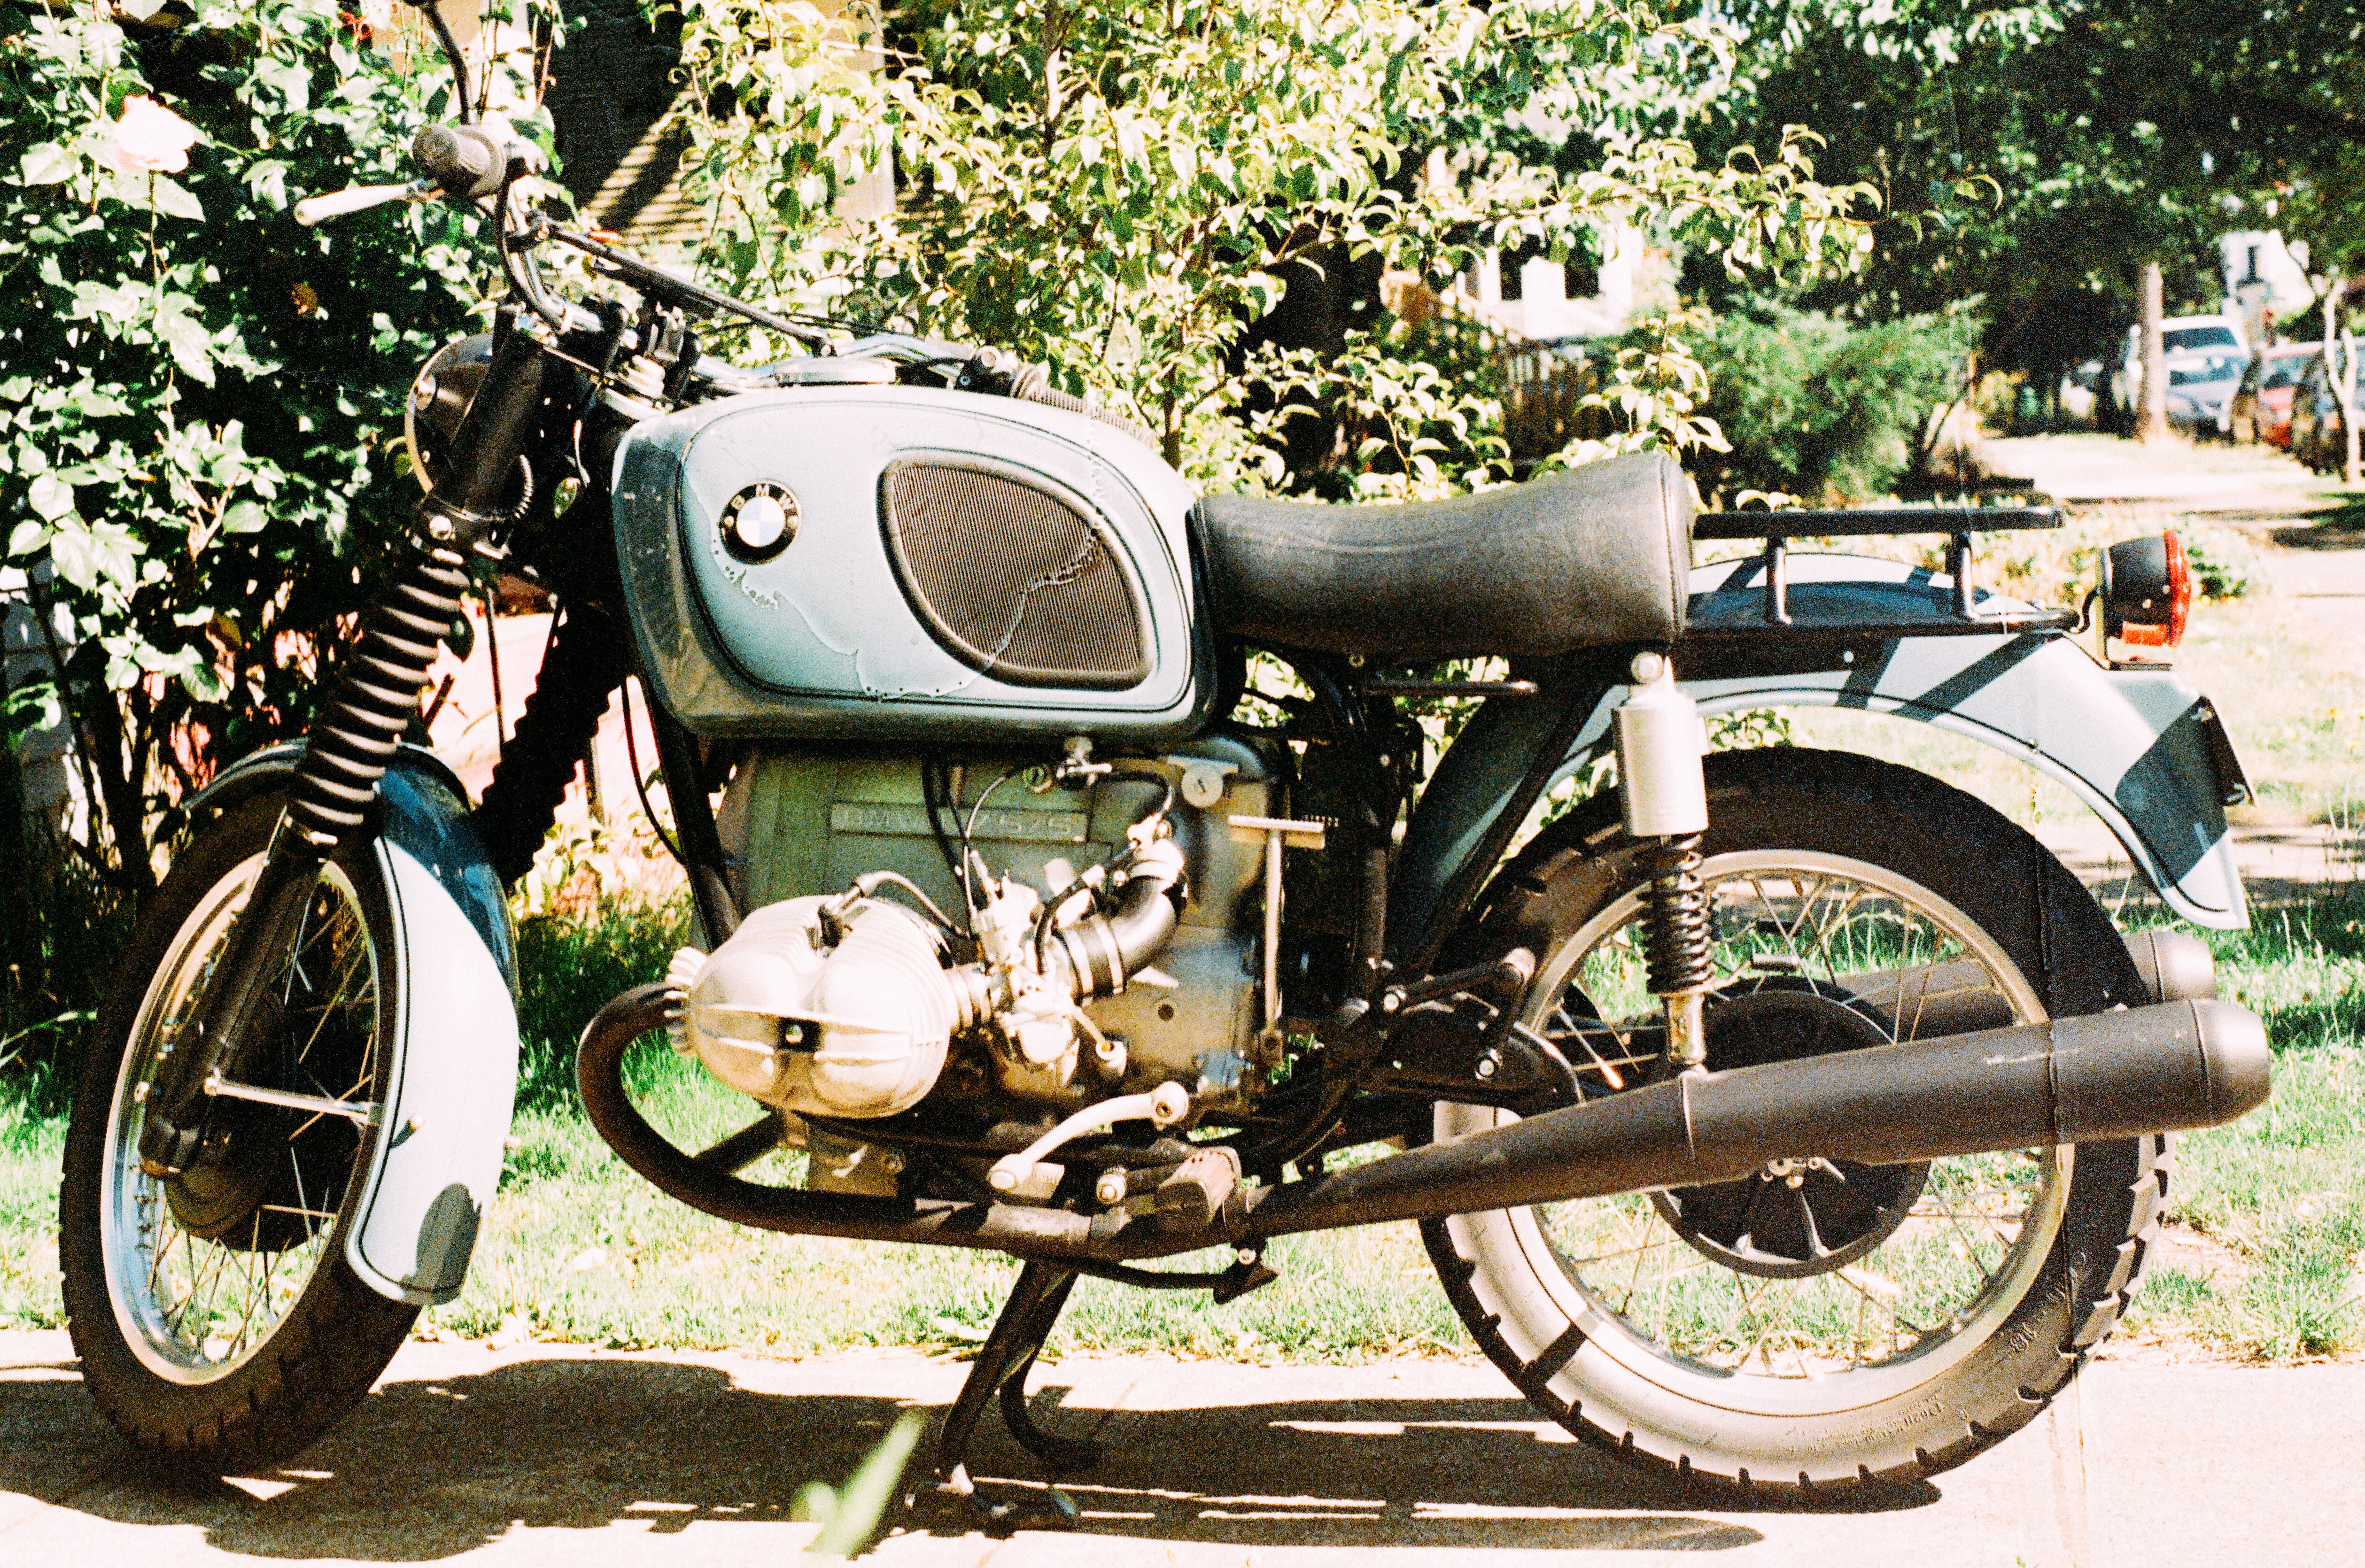 blue and green standard motorcycle